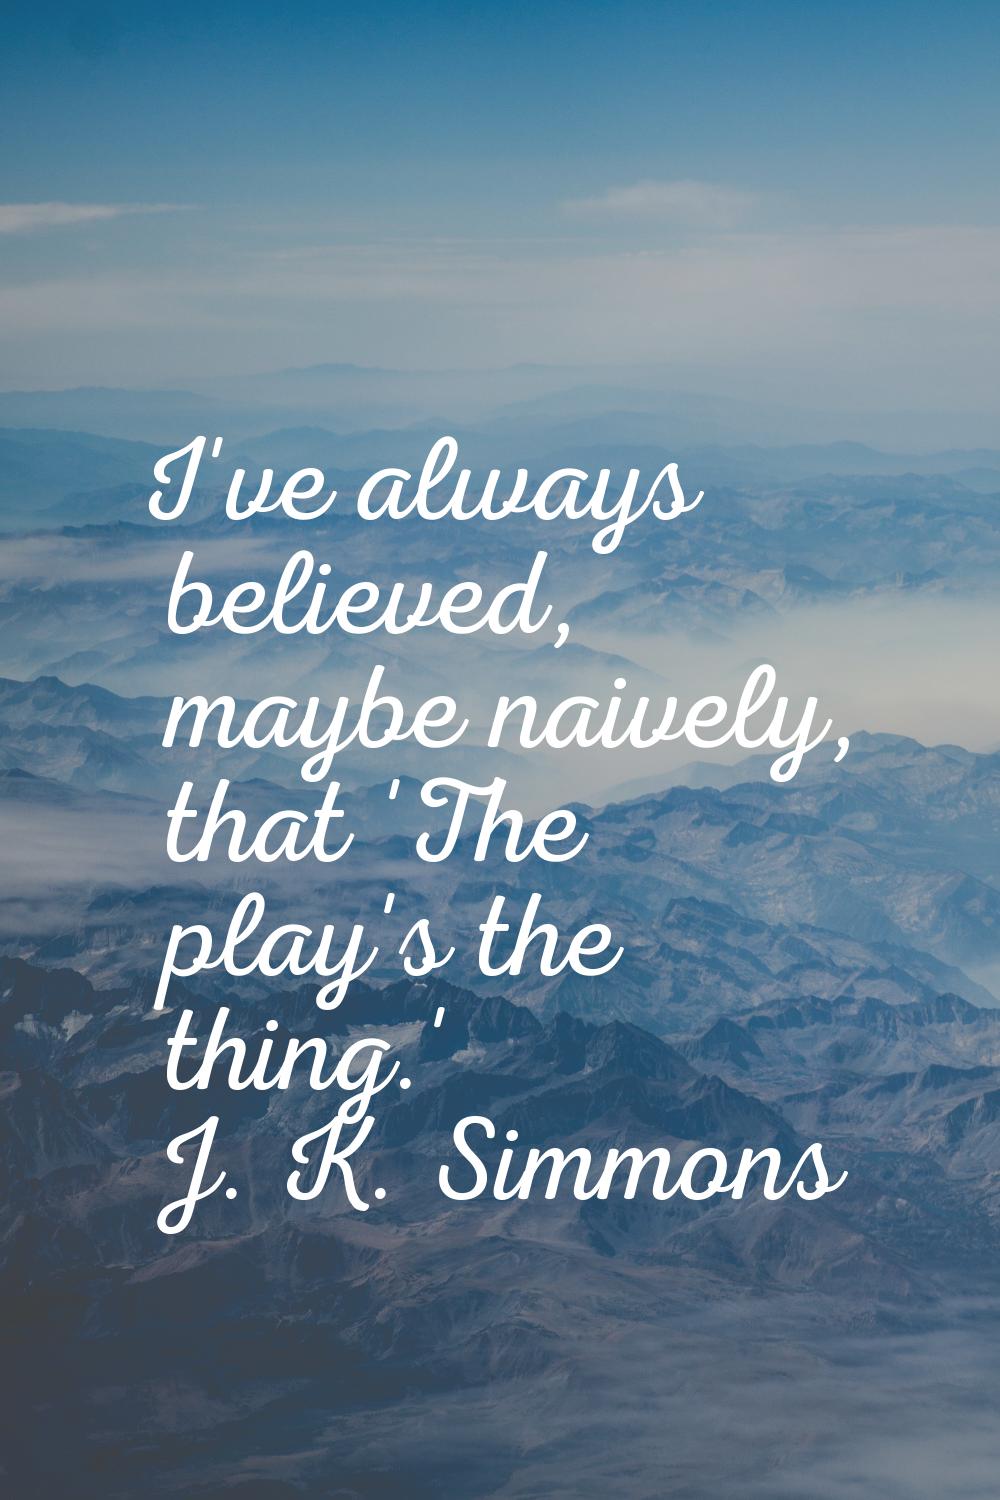 I've always believed, maybe naively, that 'The play's the thing.'